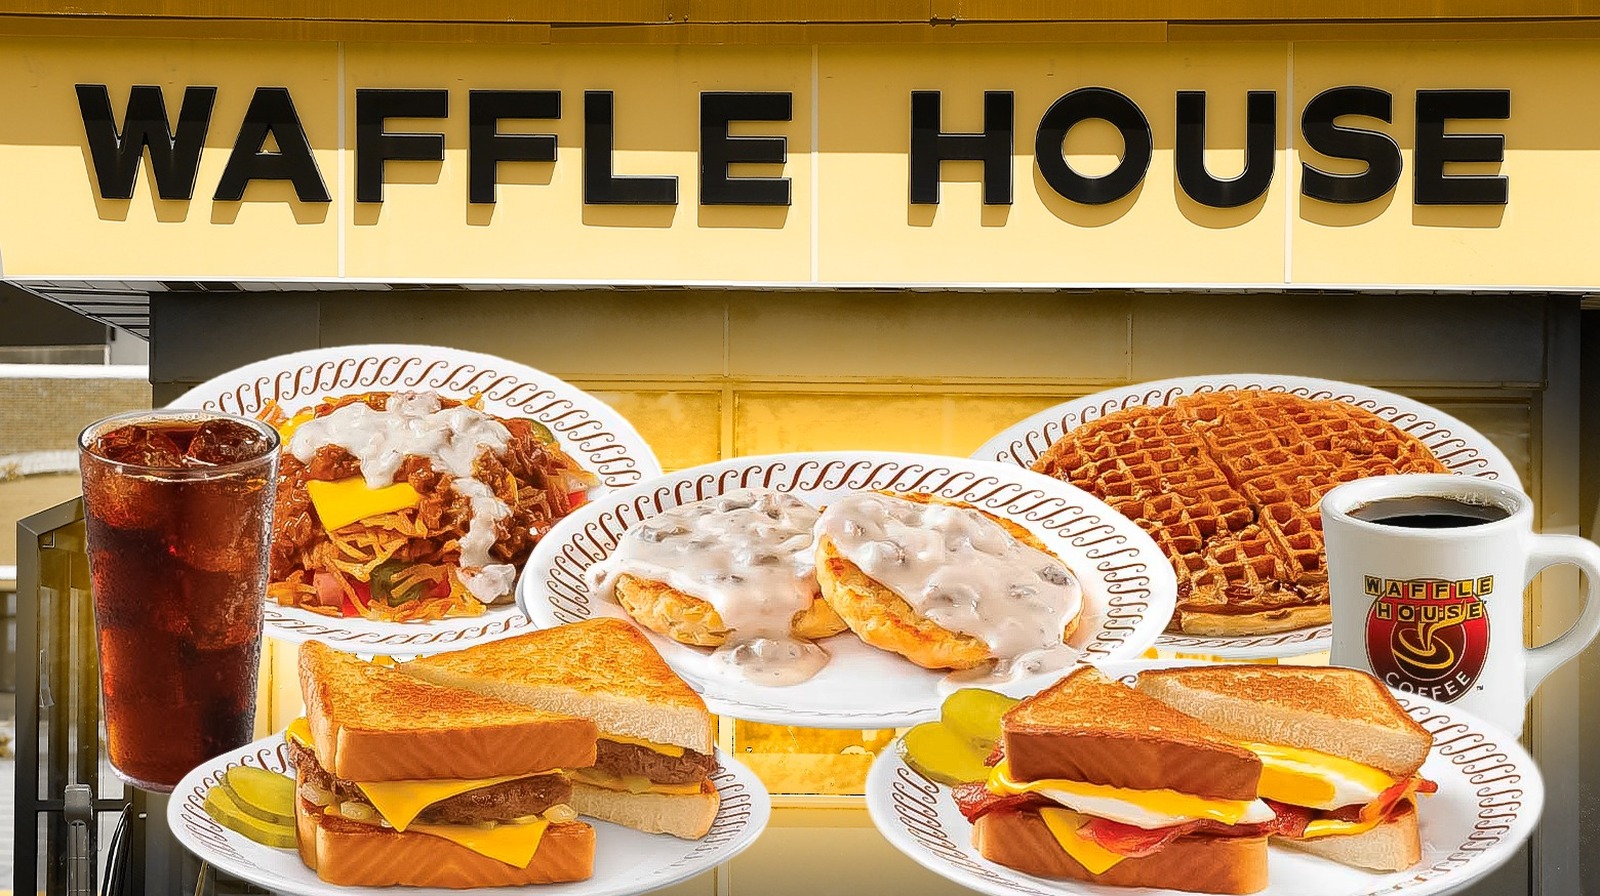 Waffle House - We've got coffee that's fresh like the morning